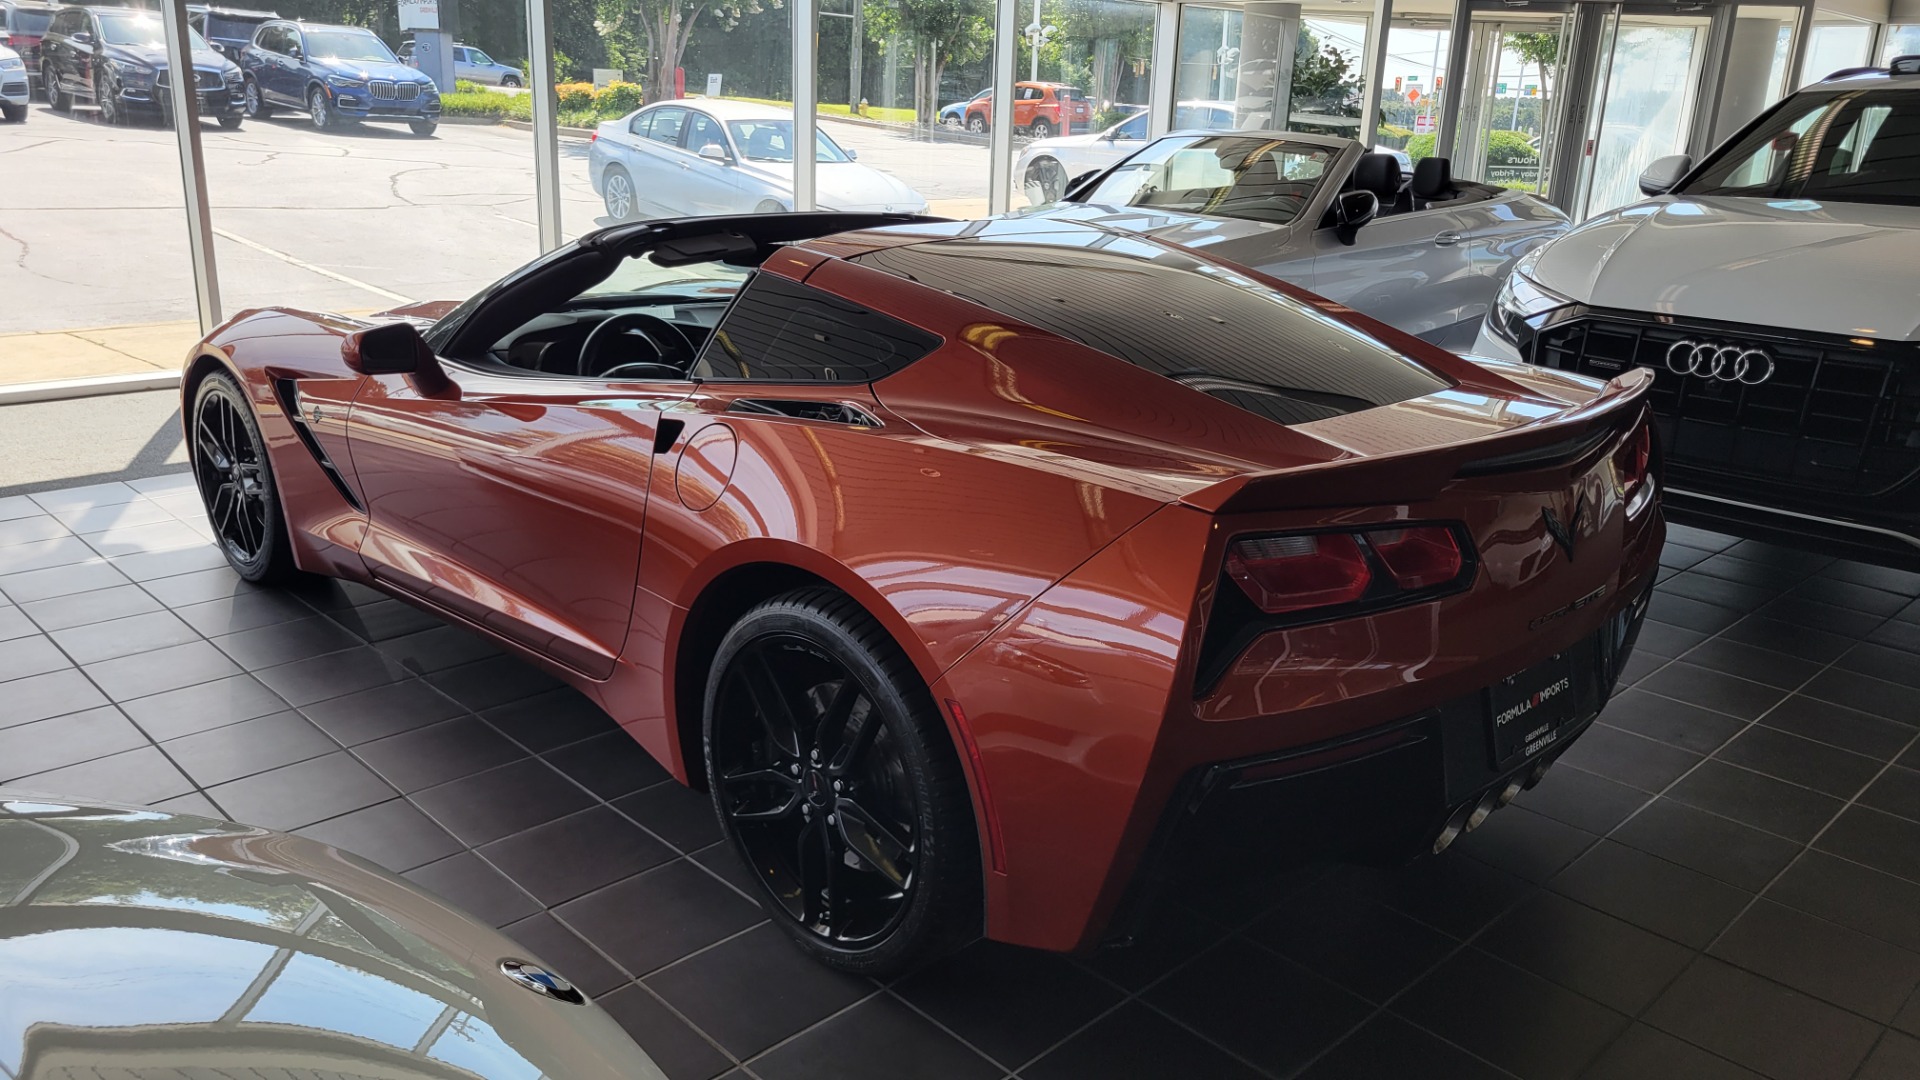 Used 2016 Chevrolet CORVETTE C7 COUPE / Z51 / 2LT / NAV / AUTO / PERF DATA & VIDEO RECORDER for sale $56,495 at Formula Imports in Charlotte NC 28227 3